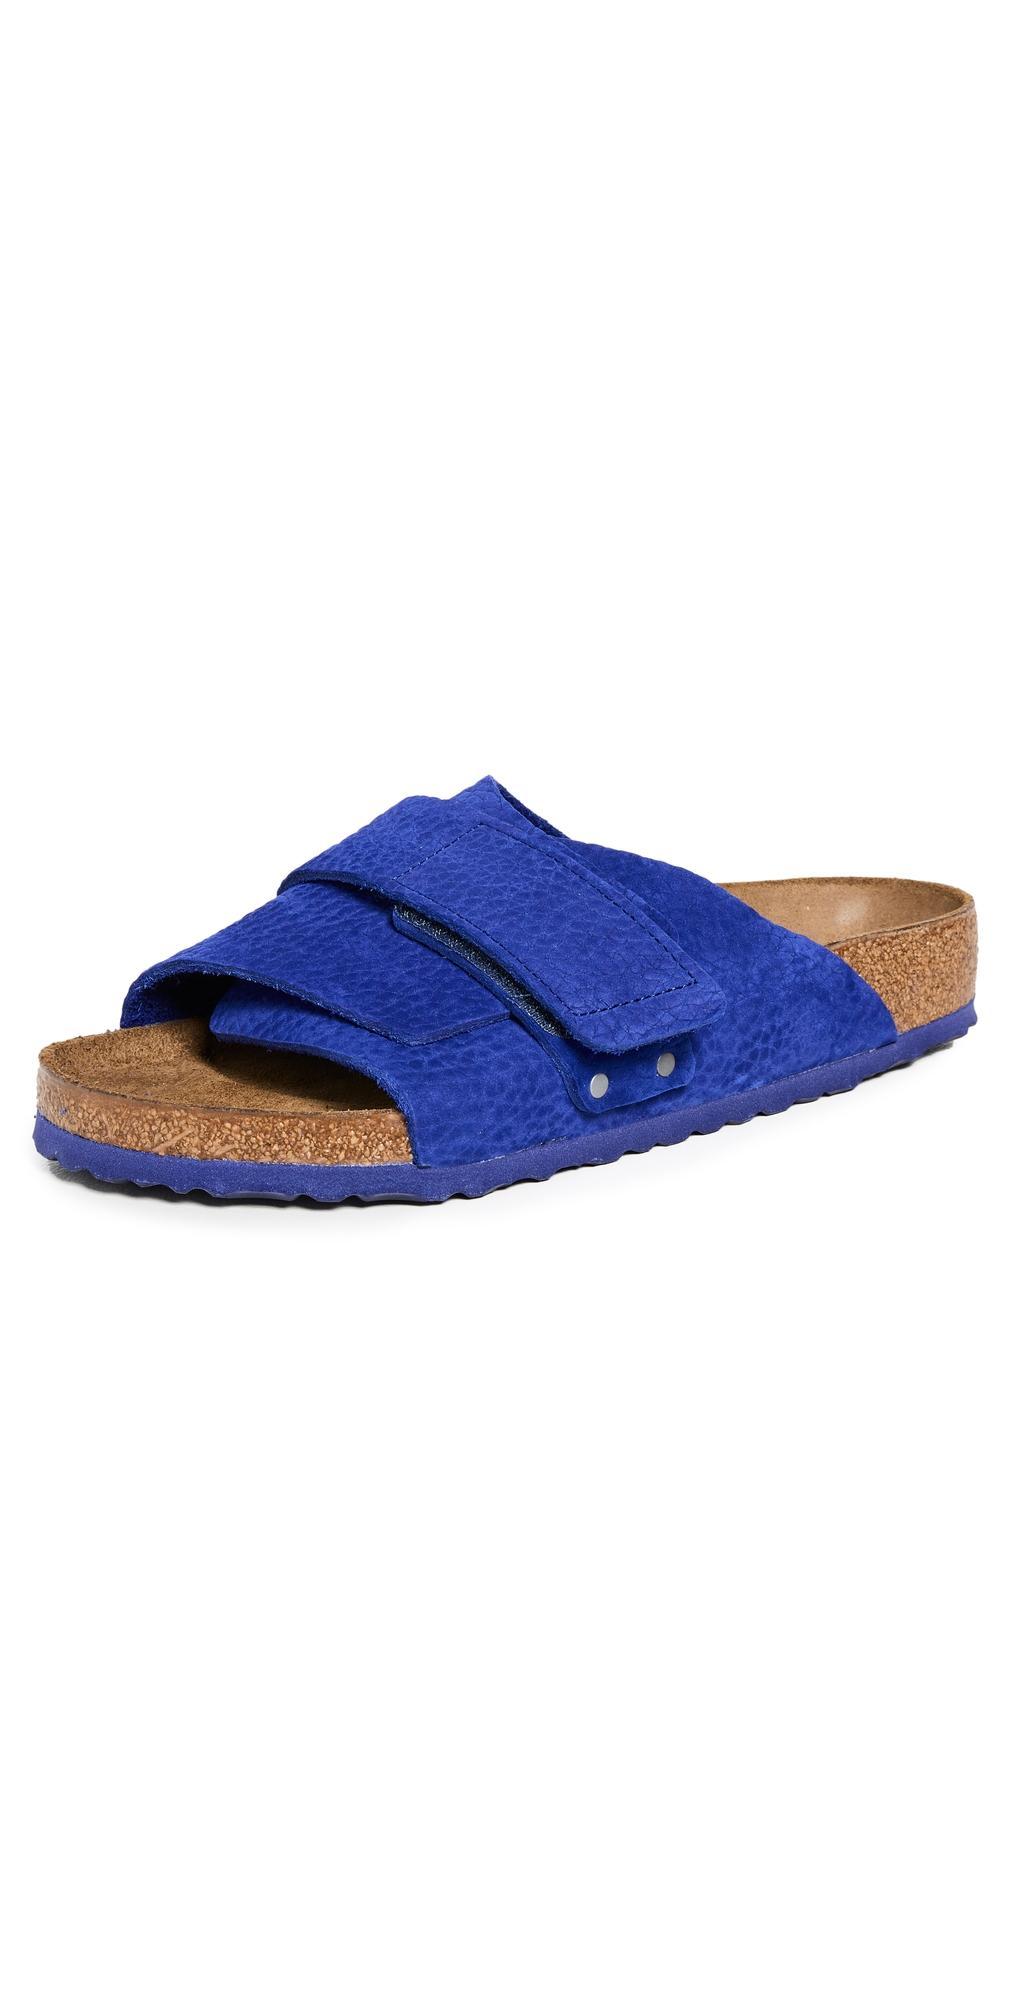 Mens Kyoto Suede Sandals Product Image